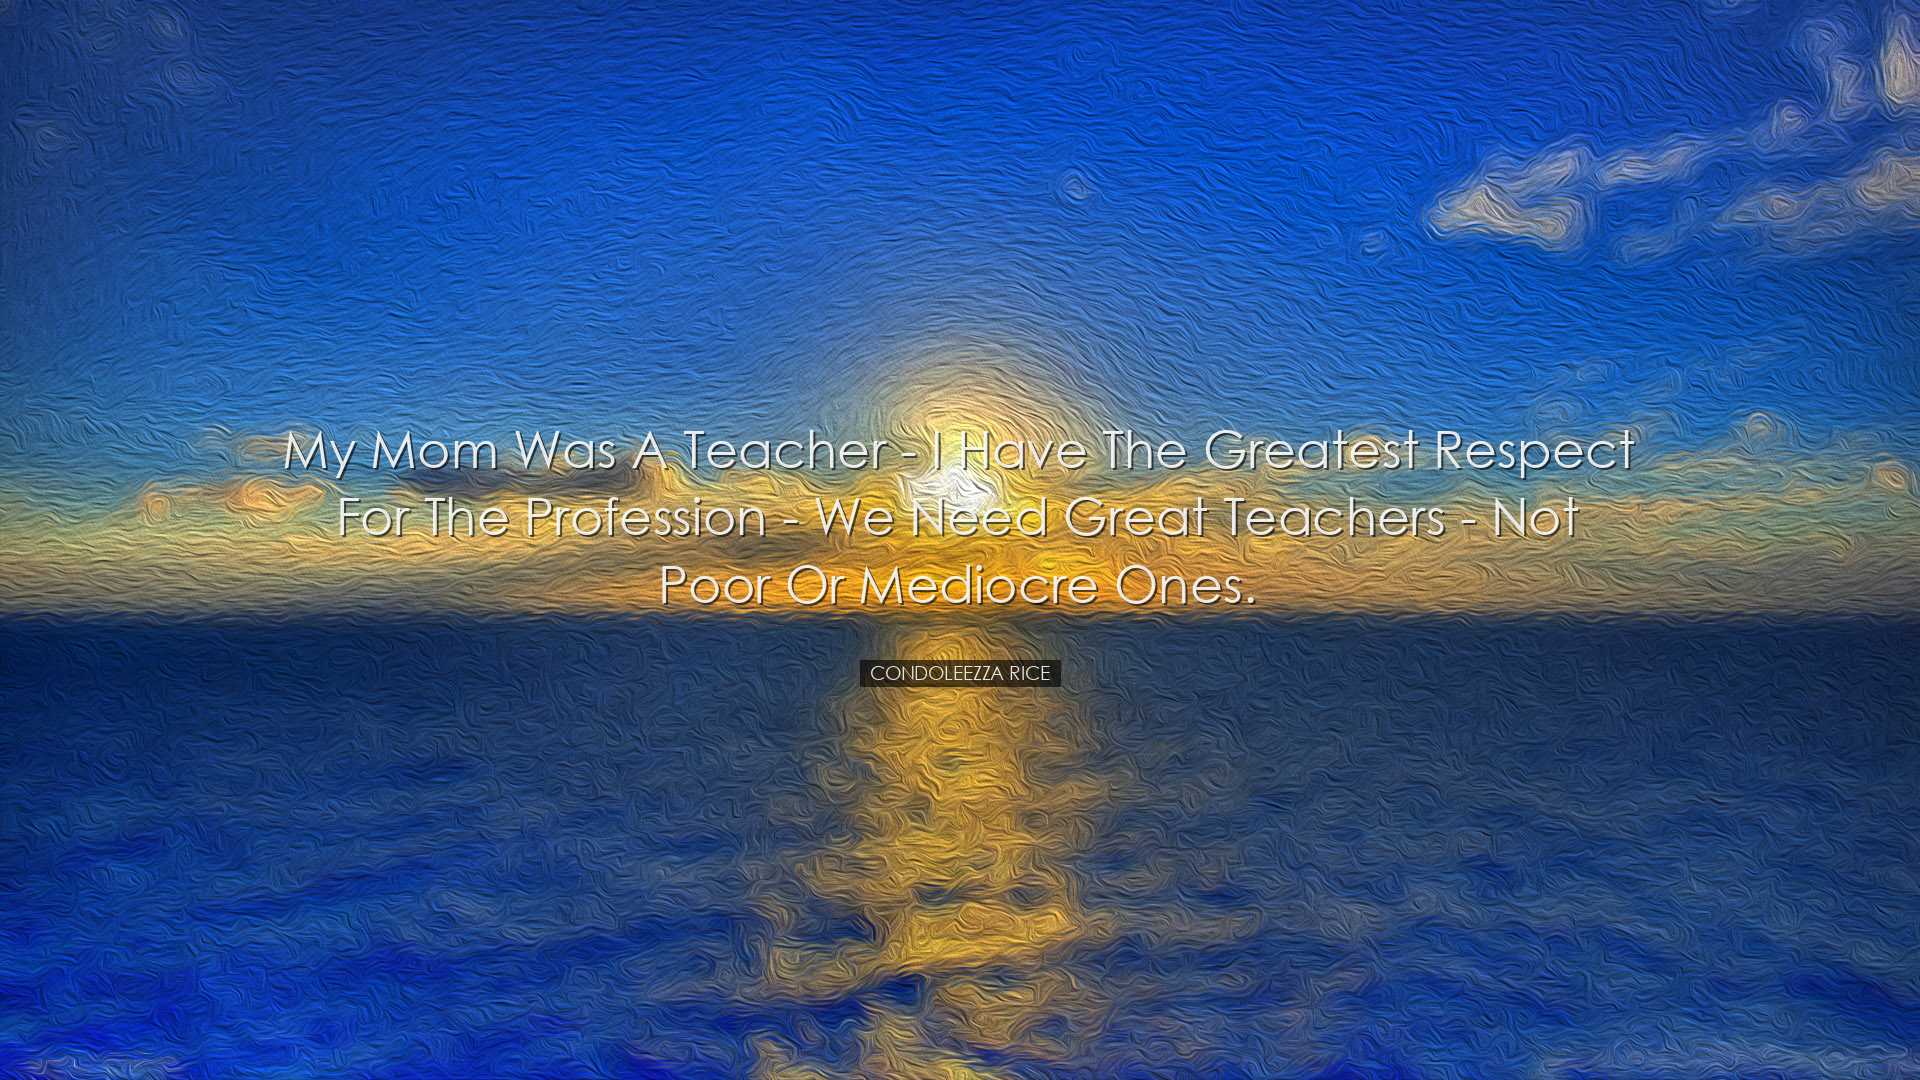 My mom was a teacher - I have the greatest respect for the profess